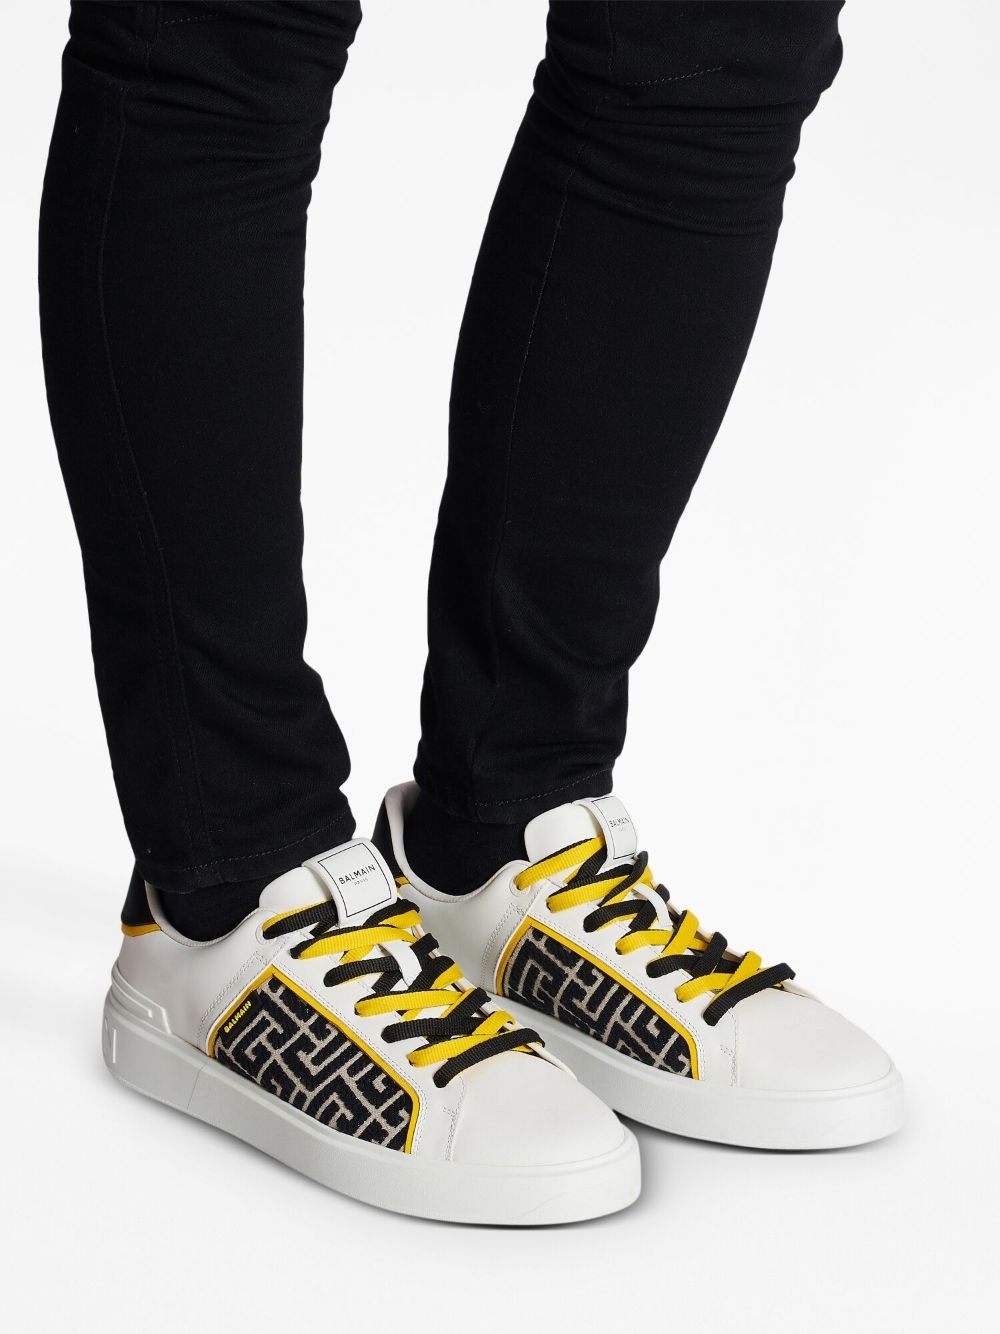 monogram-pattern lace-up sneakers - 7